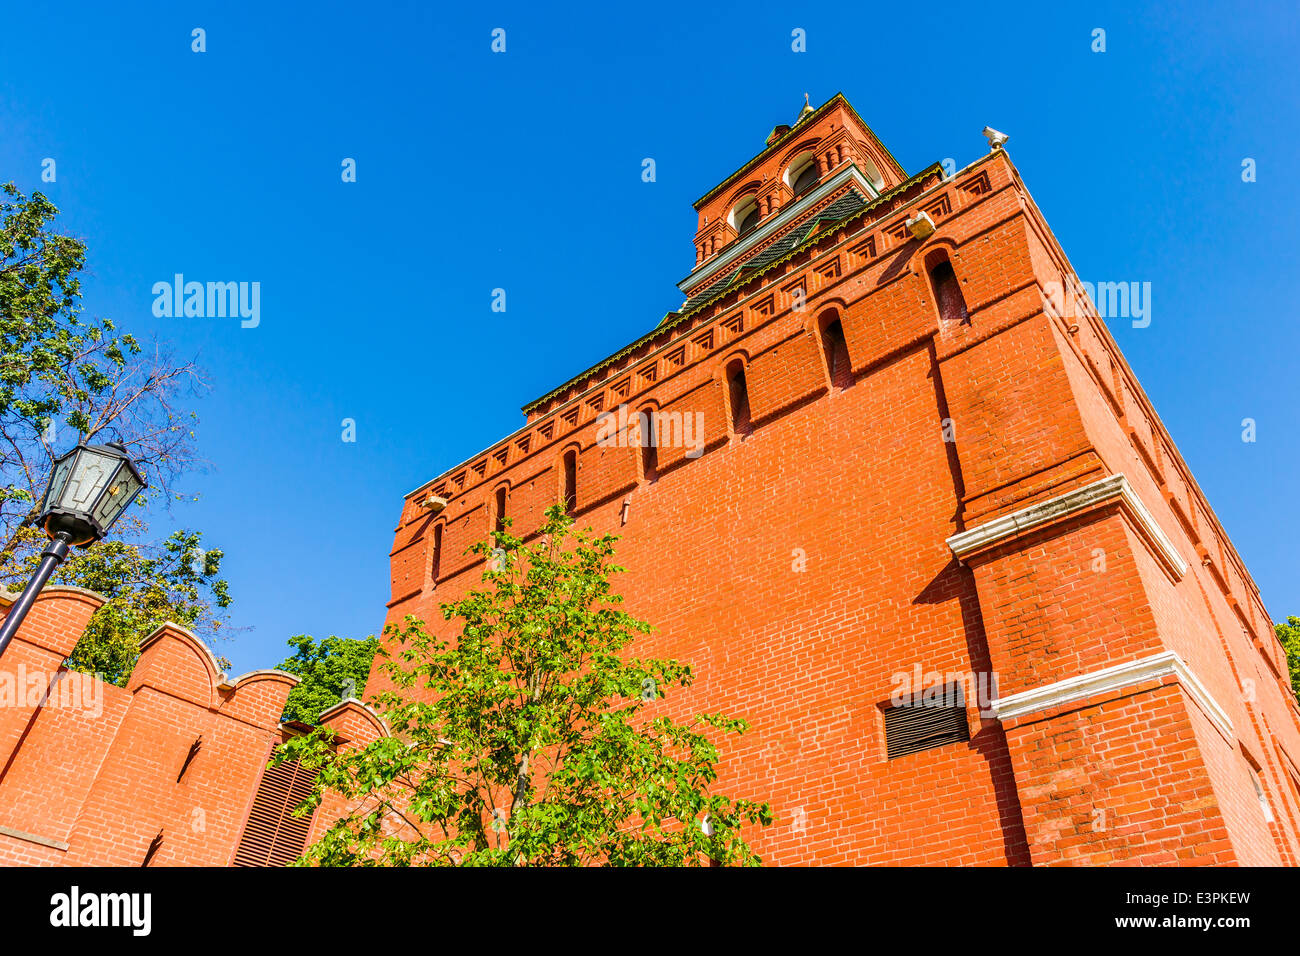 Closeup view and details of Konstantino-Eleninskaya tower of Moscow Kremlin against clear blue sky Stock Photo